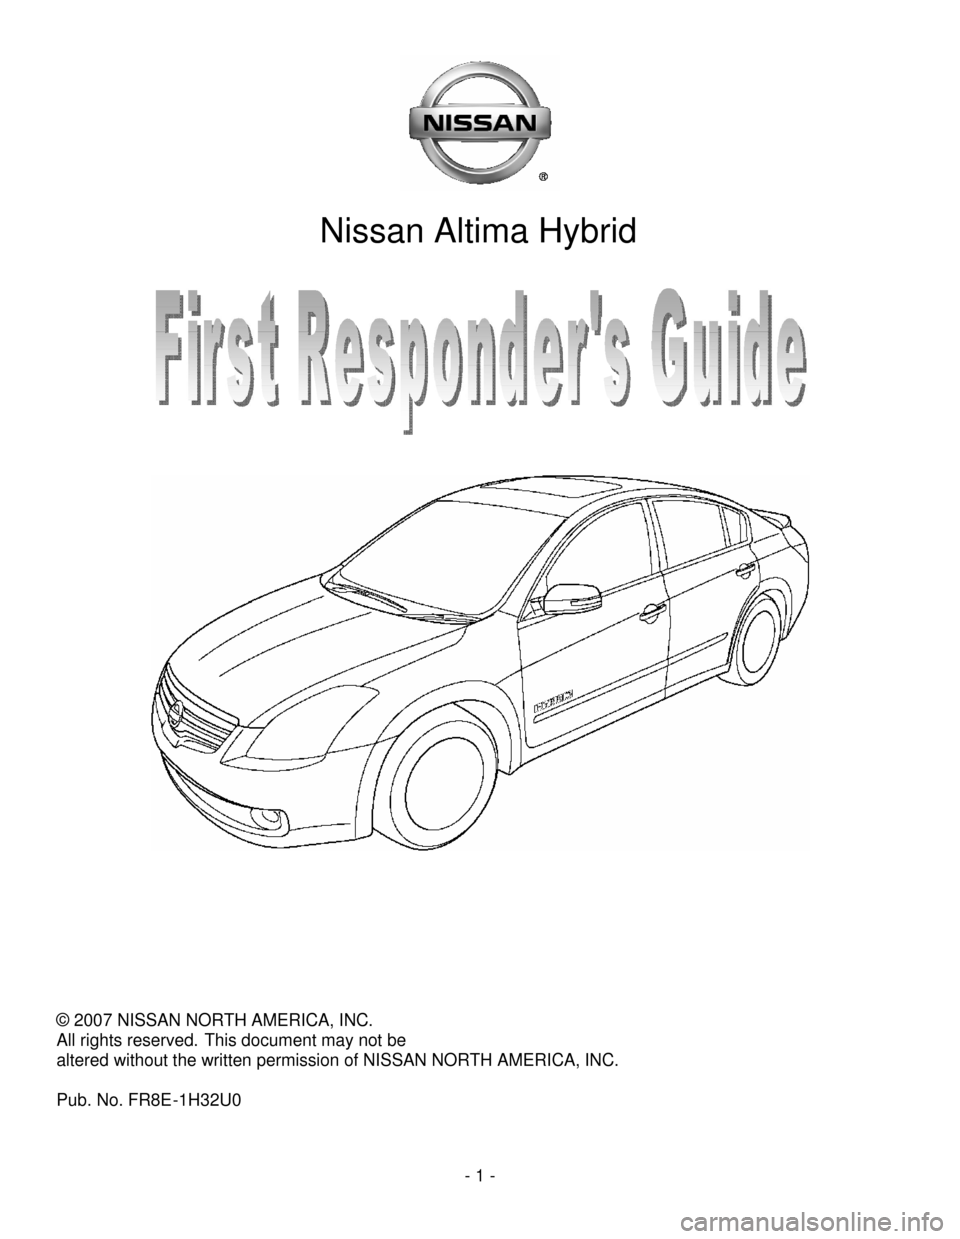 NISSAN ALTIMA HYBRID 2008 L32A / 4.G First Responders Guide 
- 1-
Nissan Altima Hybrid
All rights reserved.This document may not be
altered without the written permission of NISSAN NORTH AMERICA, INC.

© 2007 NISSAN NORTH AMERICA, INC.
Pub. No. FR8E-1H32U0 